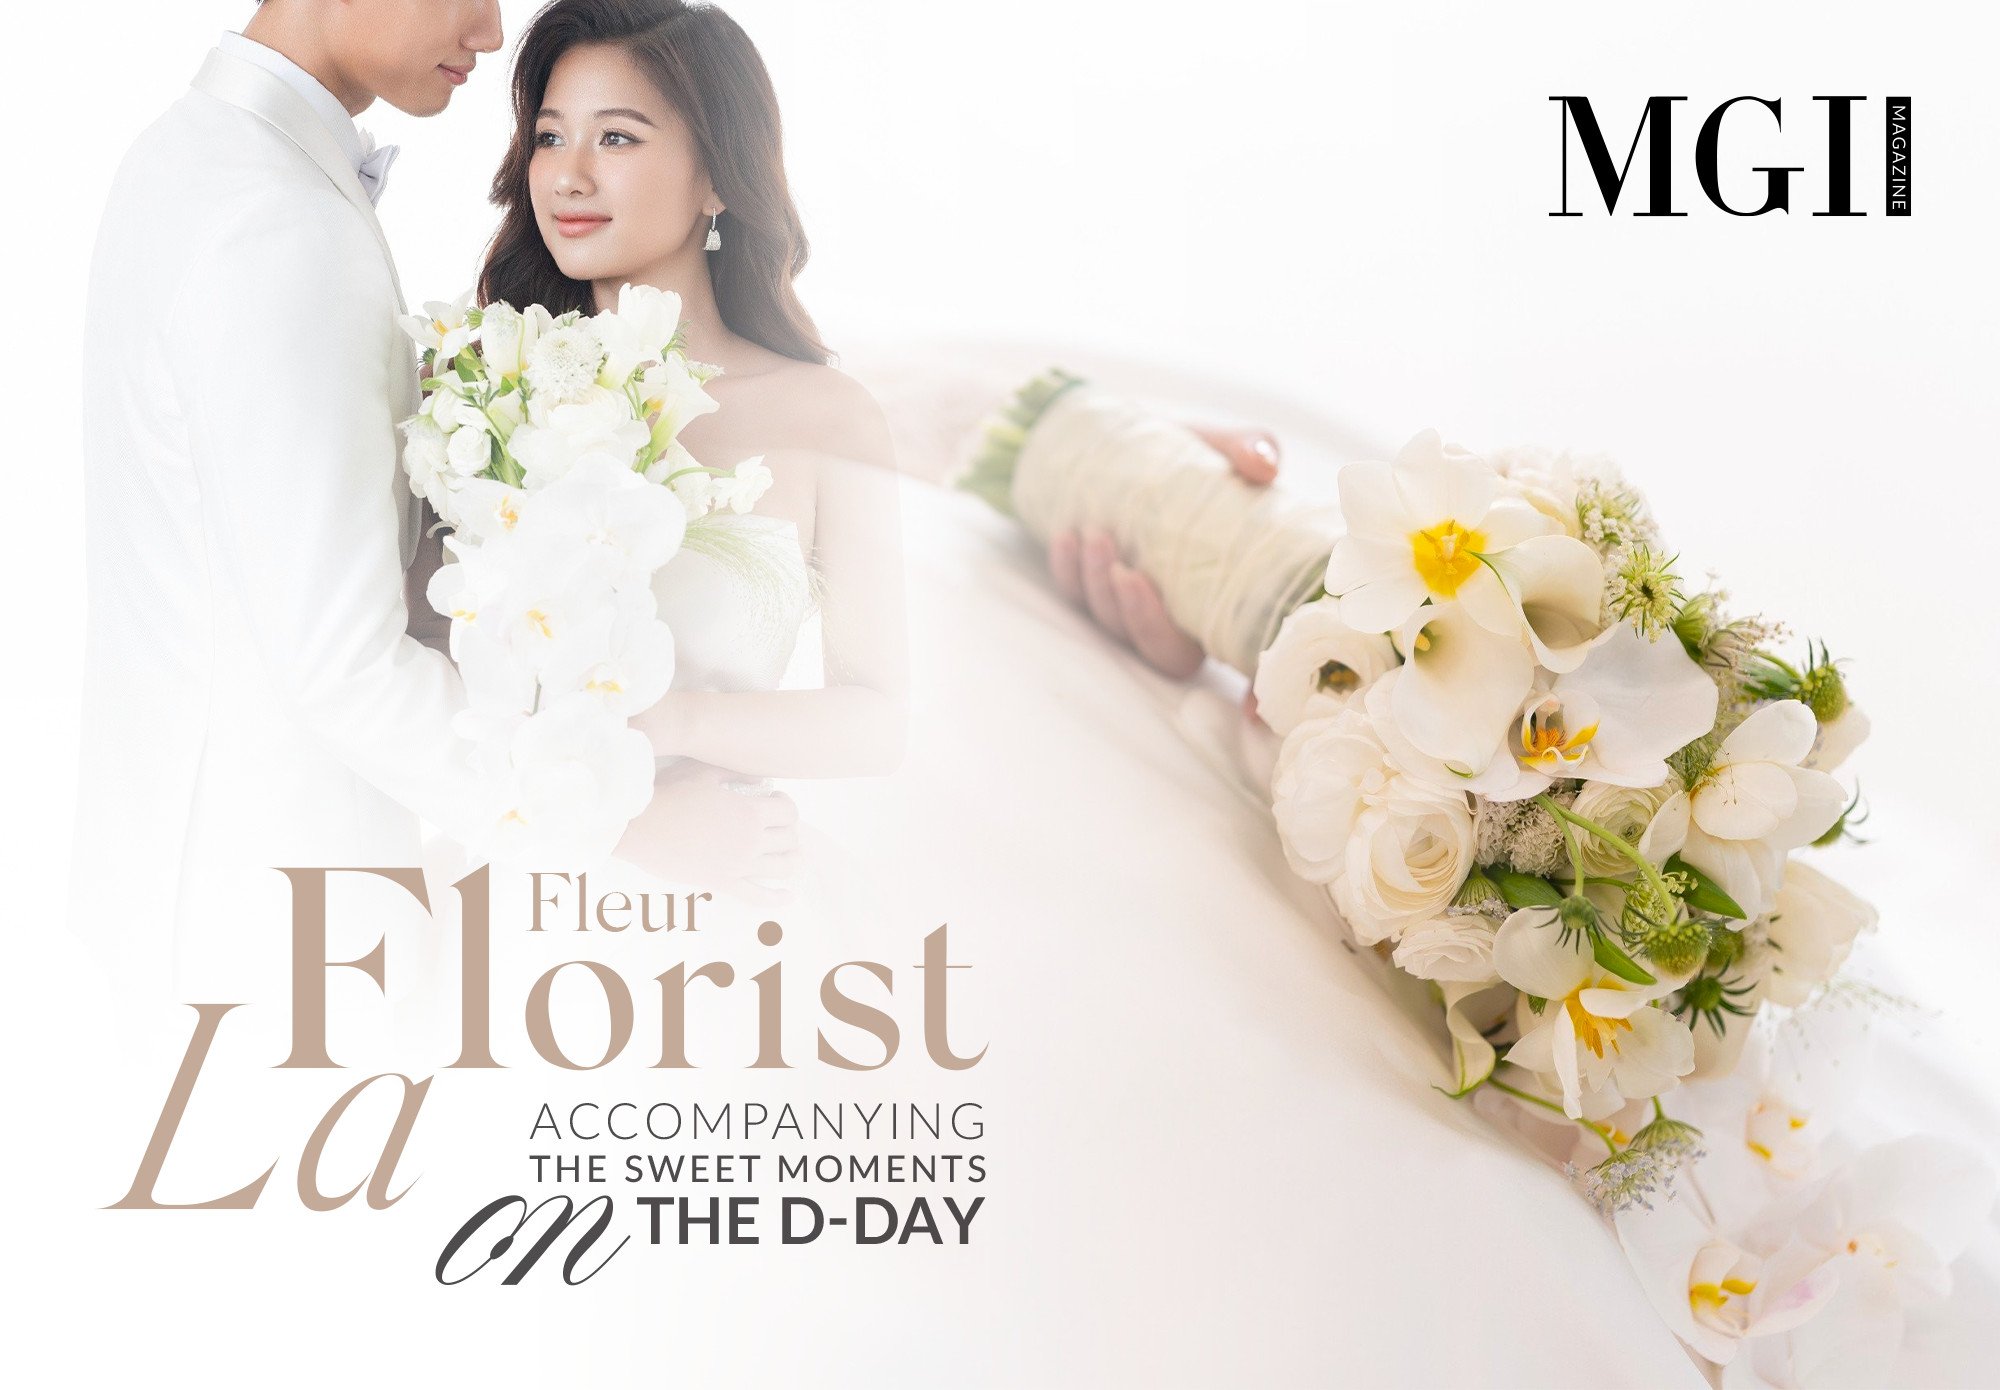 La Fleur Florist accompanying the sweet moments on the D-Day